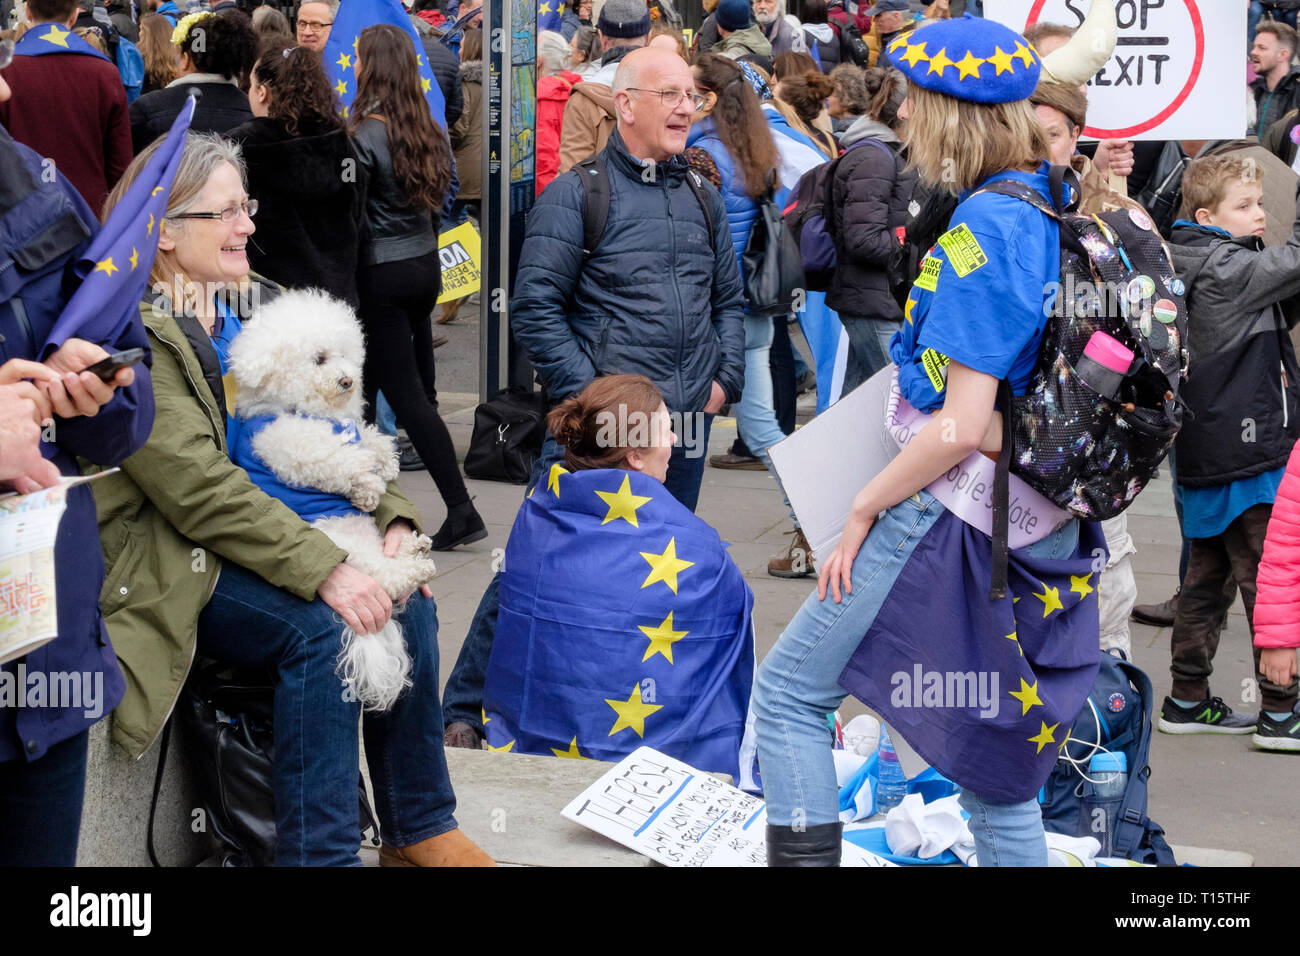 London, UK. 23rd March 2019. Hundreds of thousands of people march through central London demanding a second vote on the UK's membership of the European Union. Pictured: Marchers gather to listen to speeches in Parliament Square. Credit: mark phillips/Alamy Live News Stock Photo